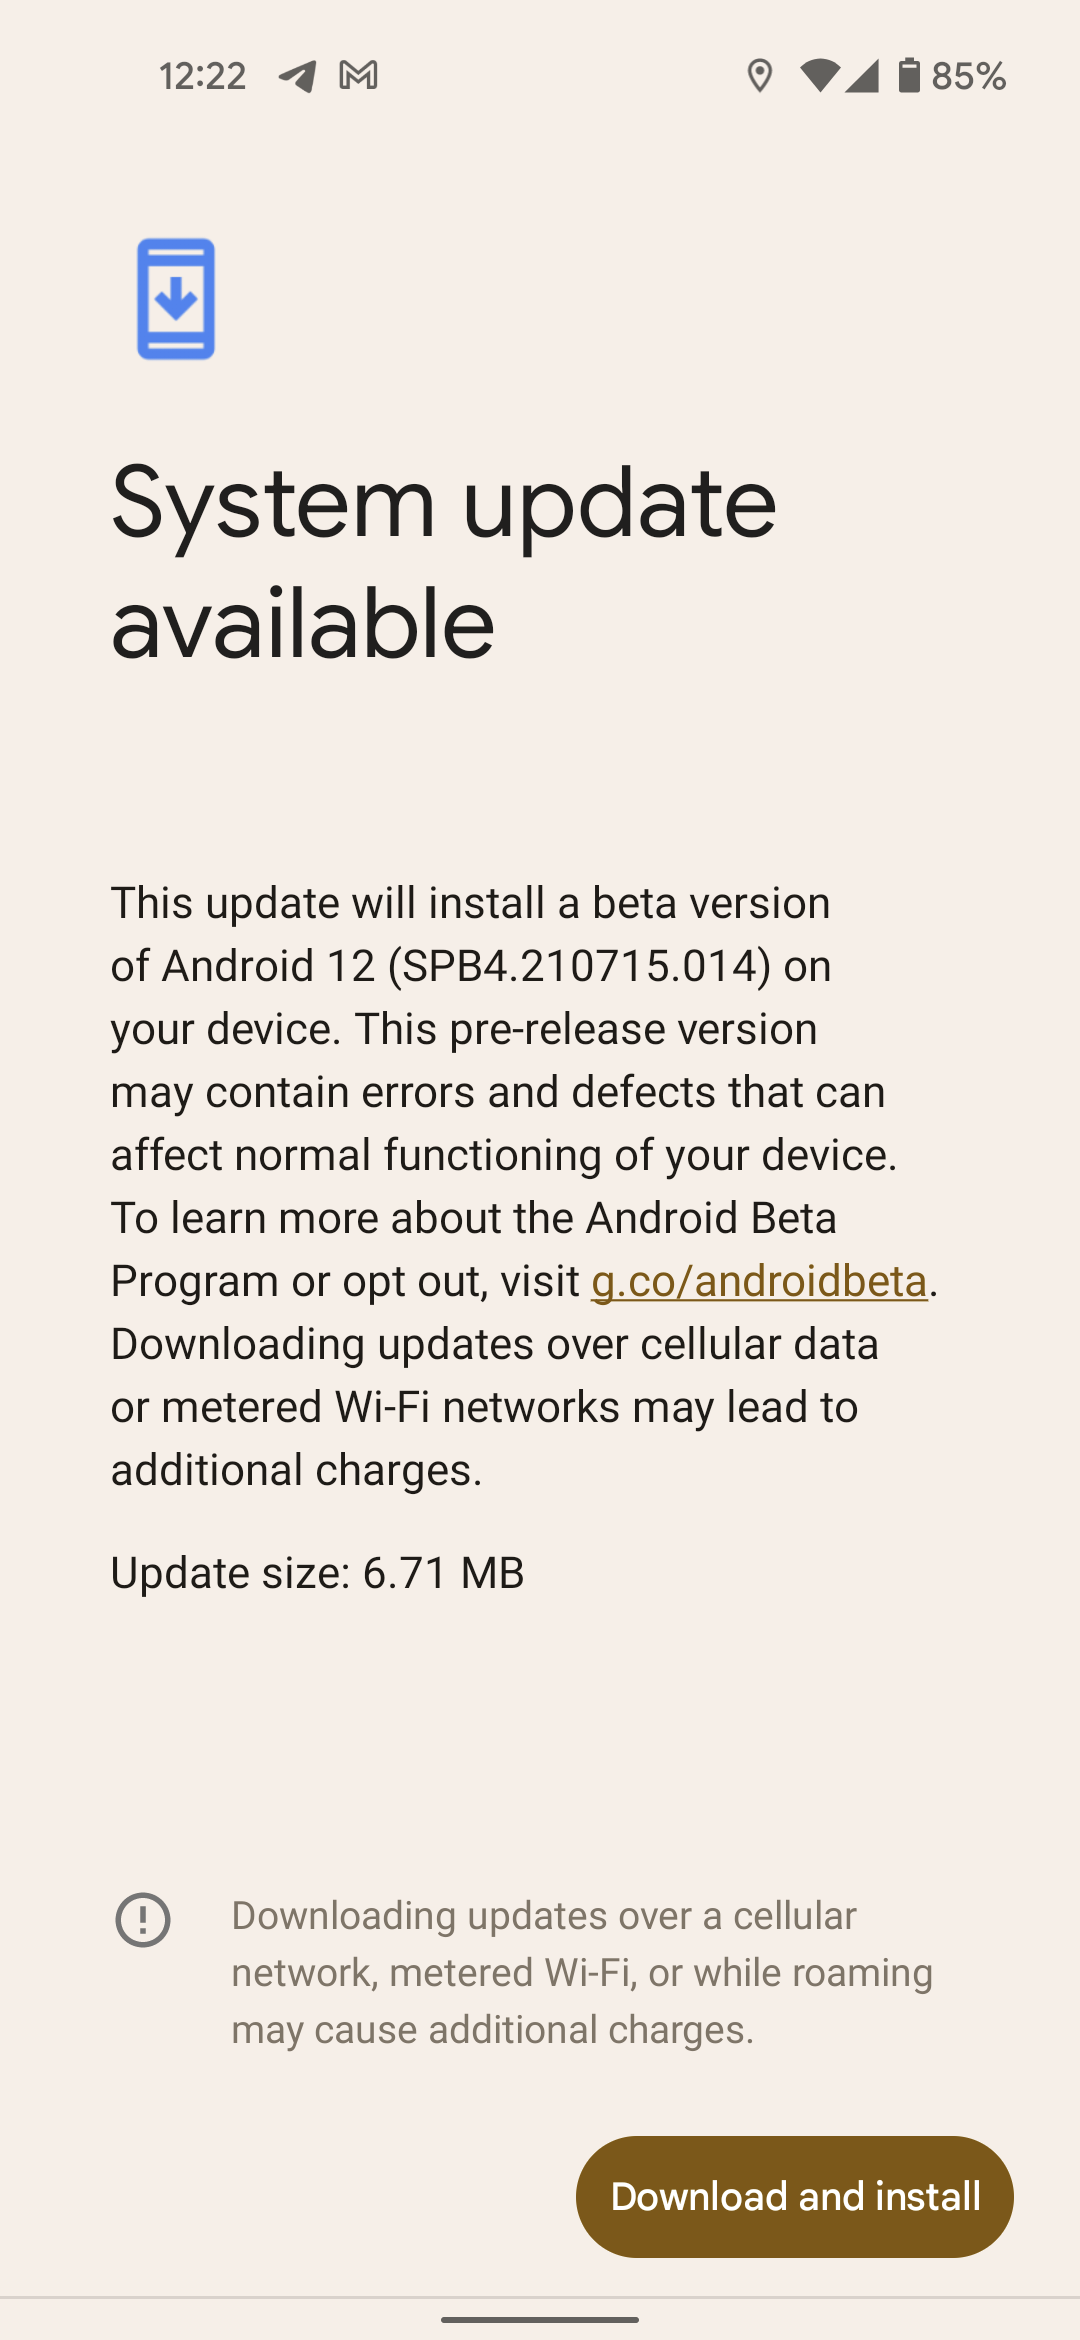 Android 12 beta 4 1 update